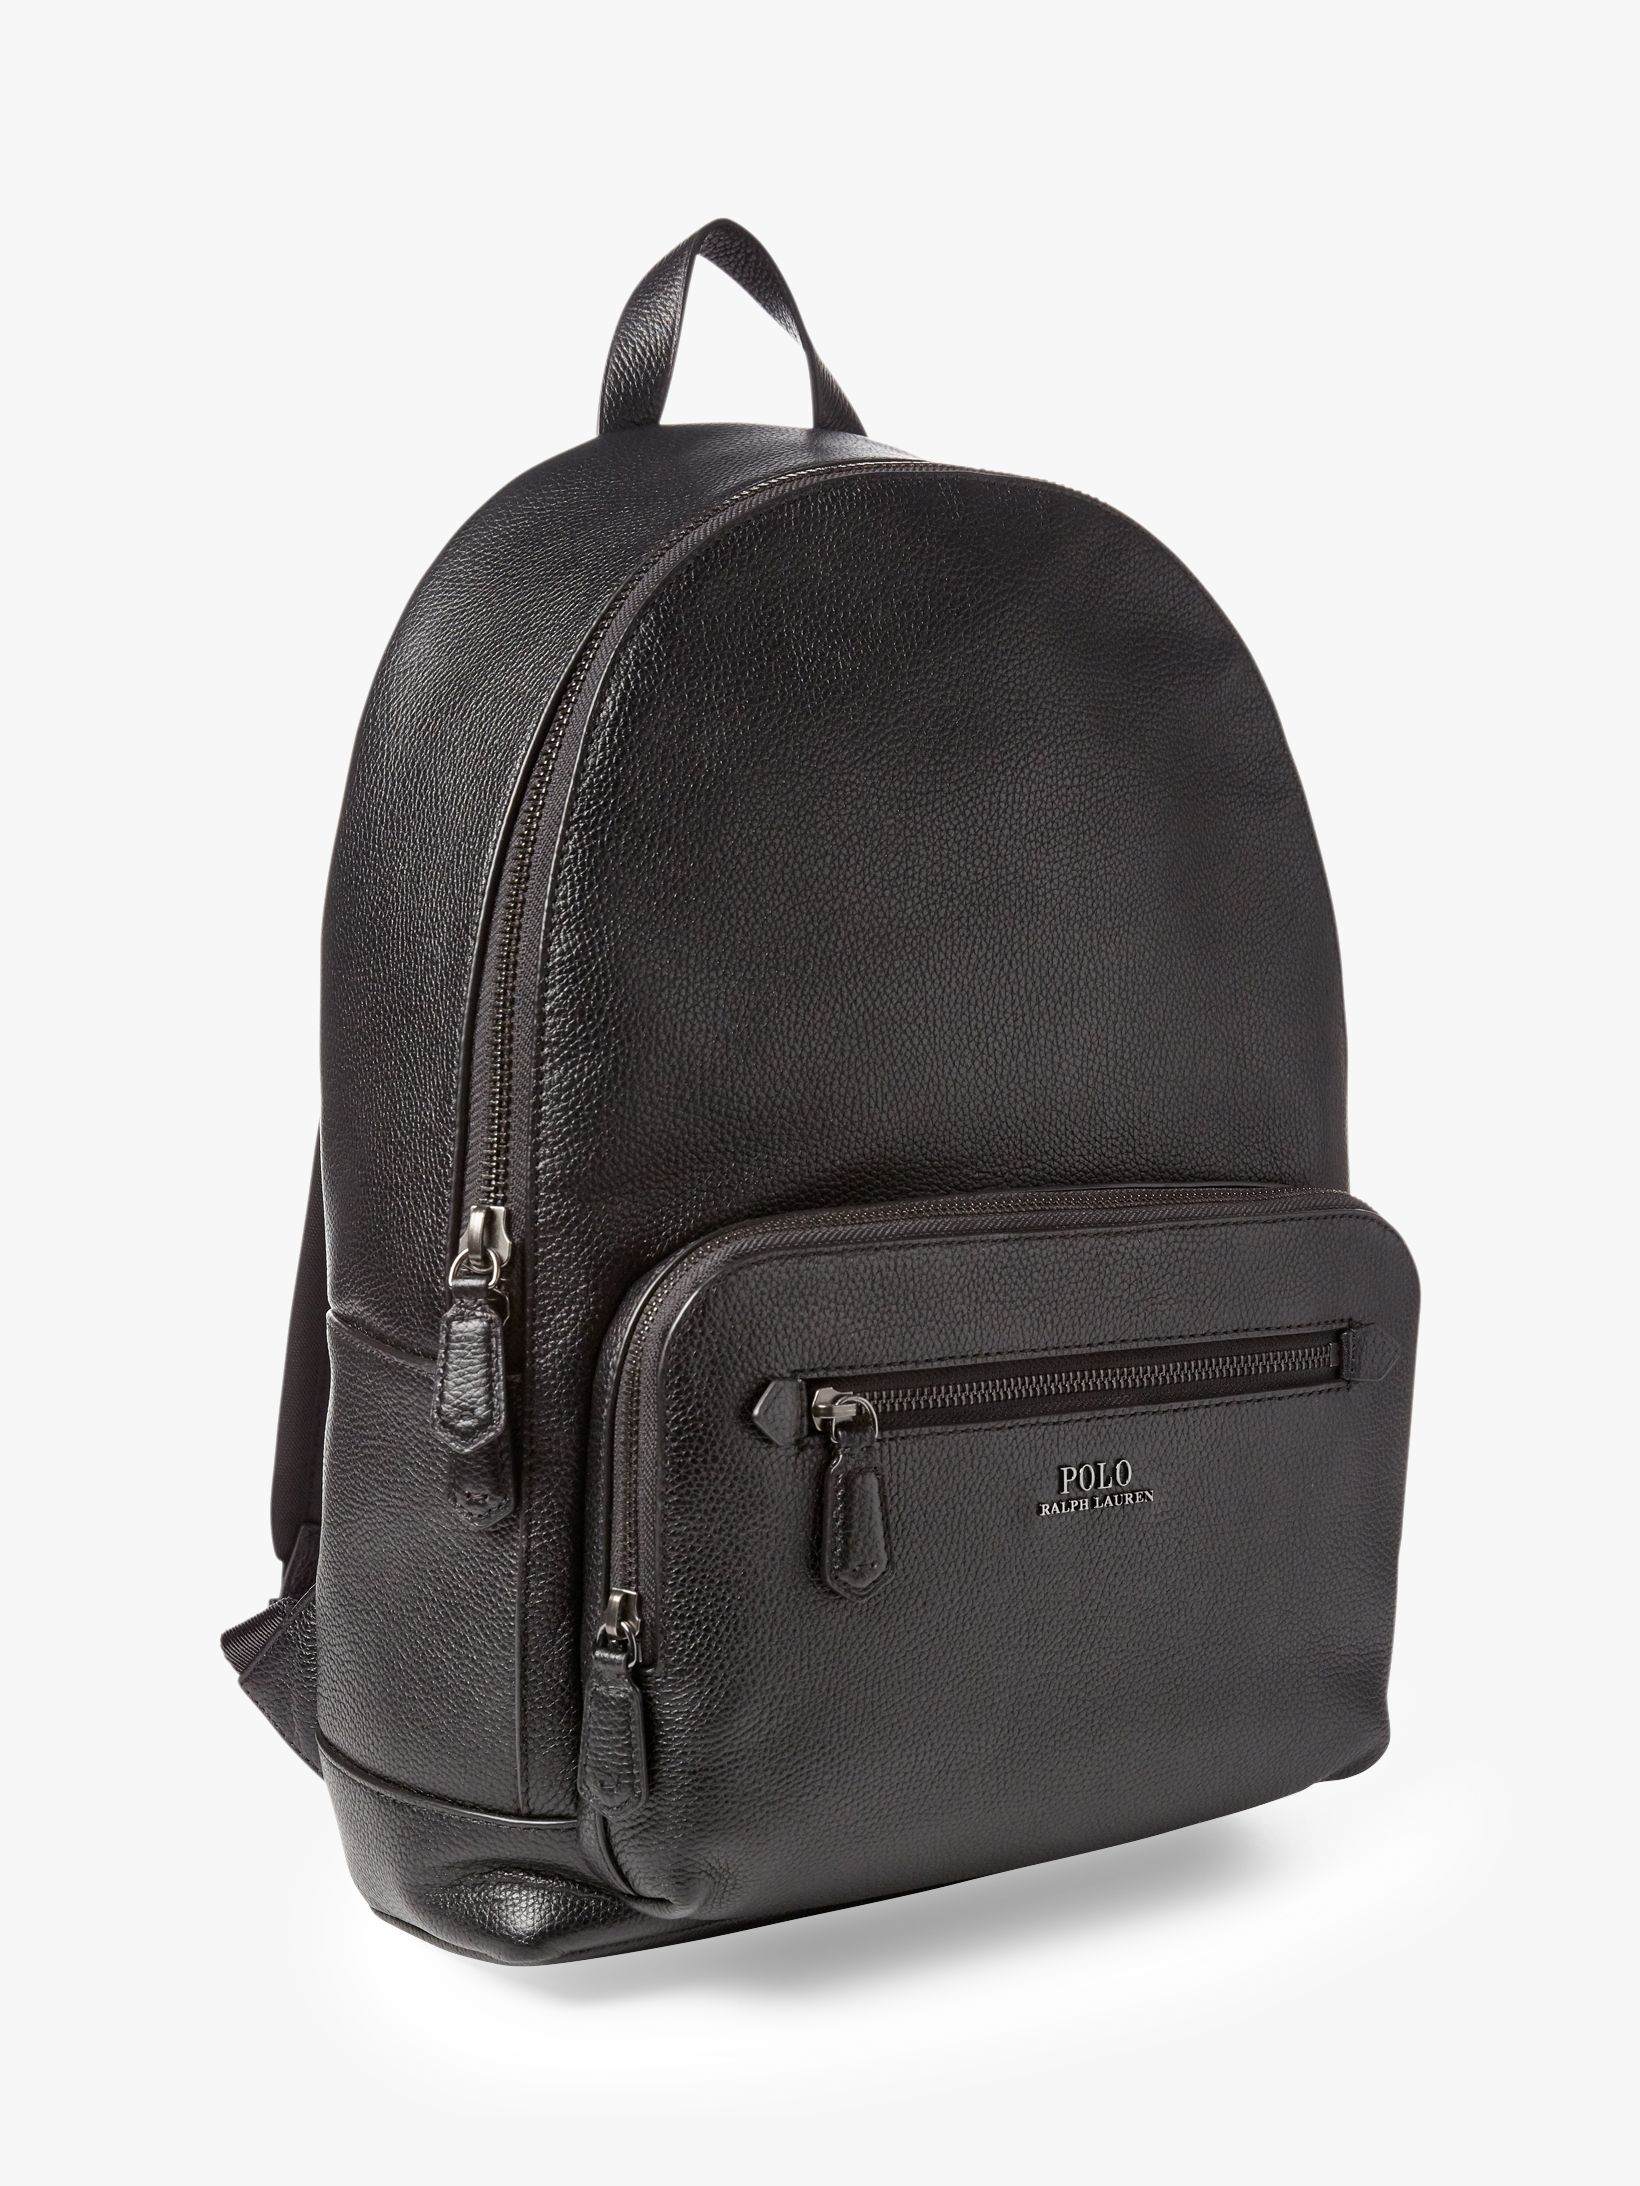 Polo Ralph Lauren Leather Backpack 